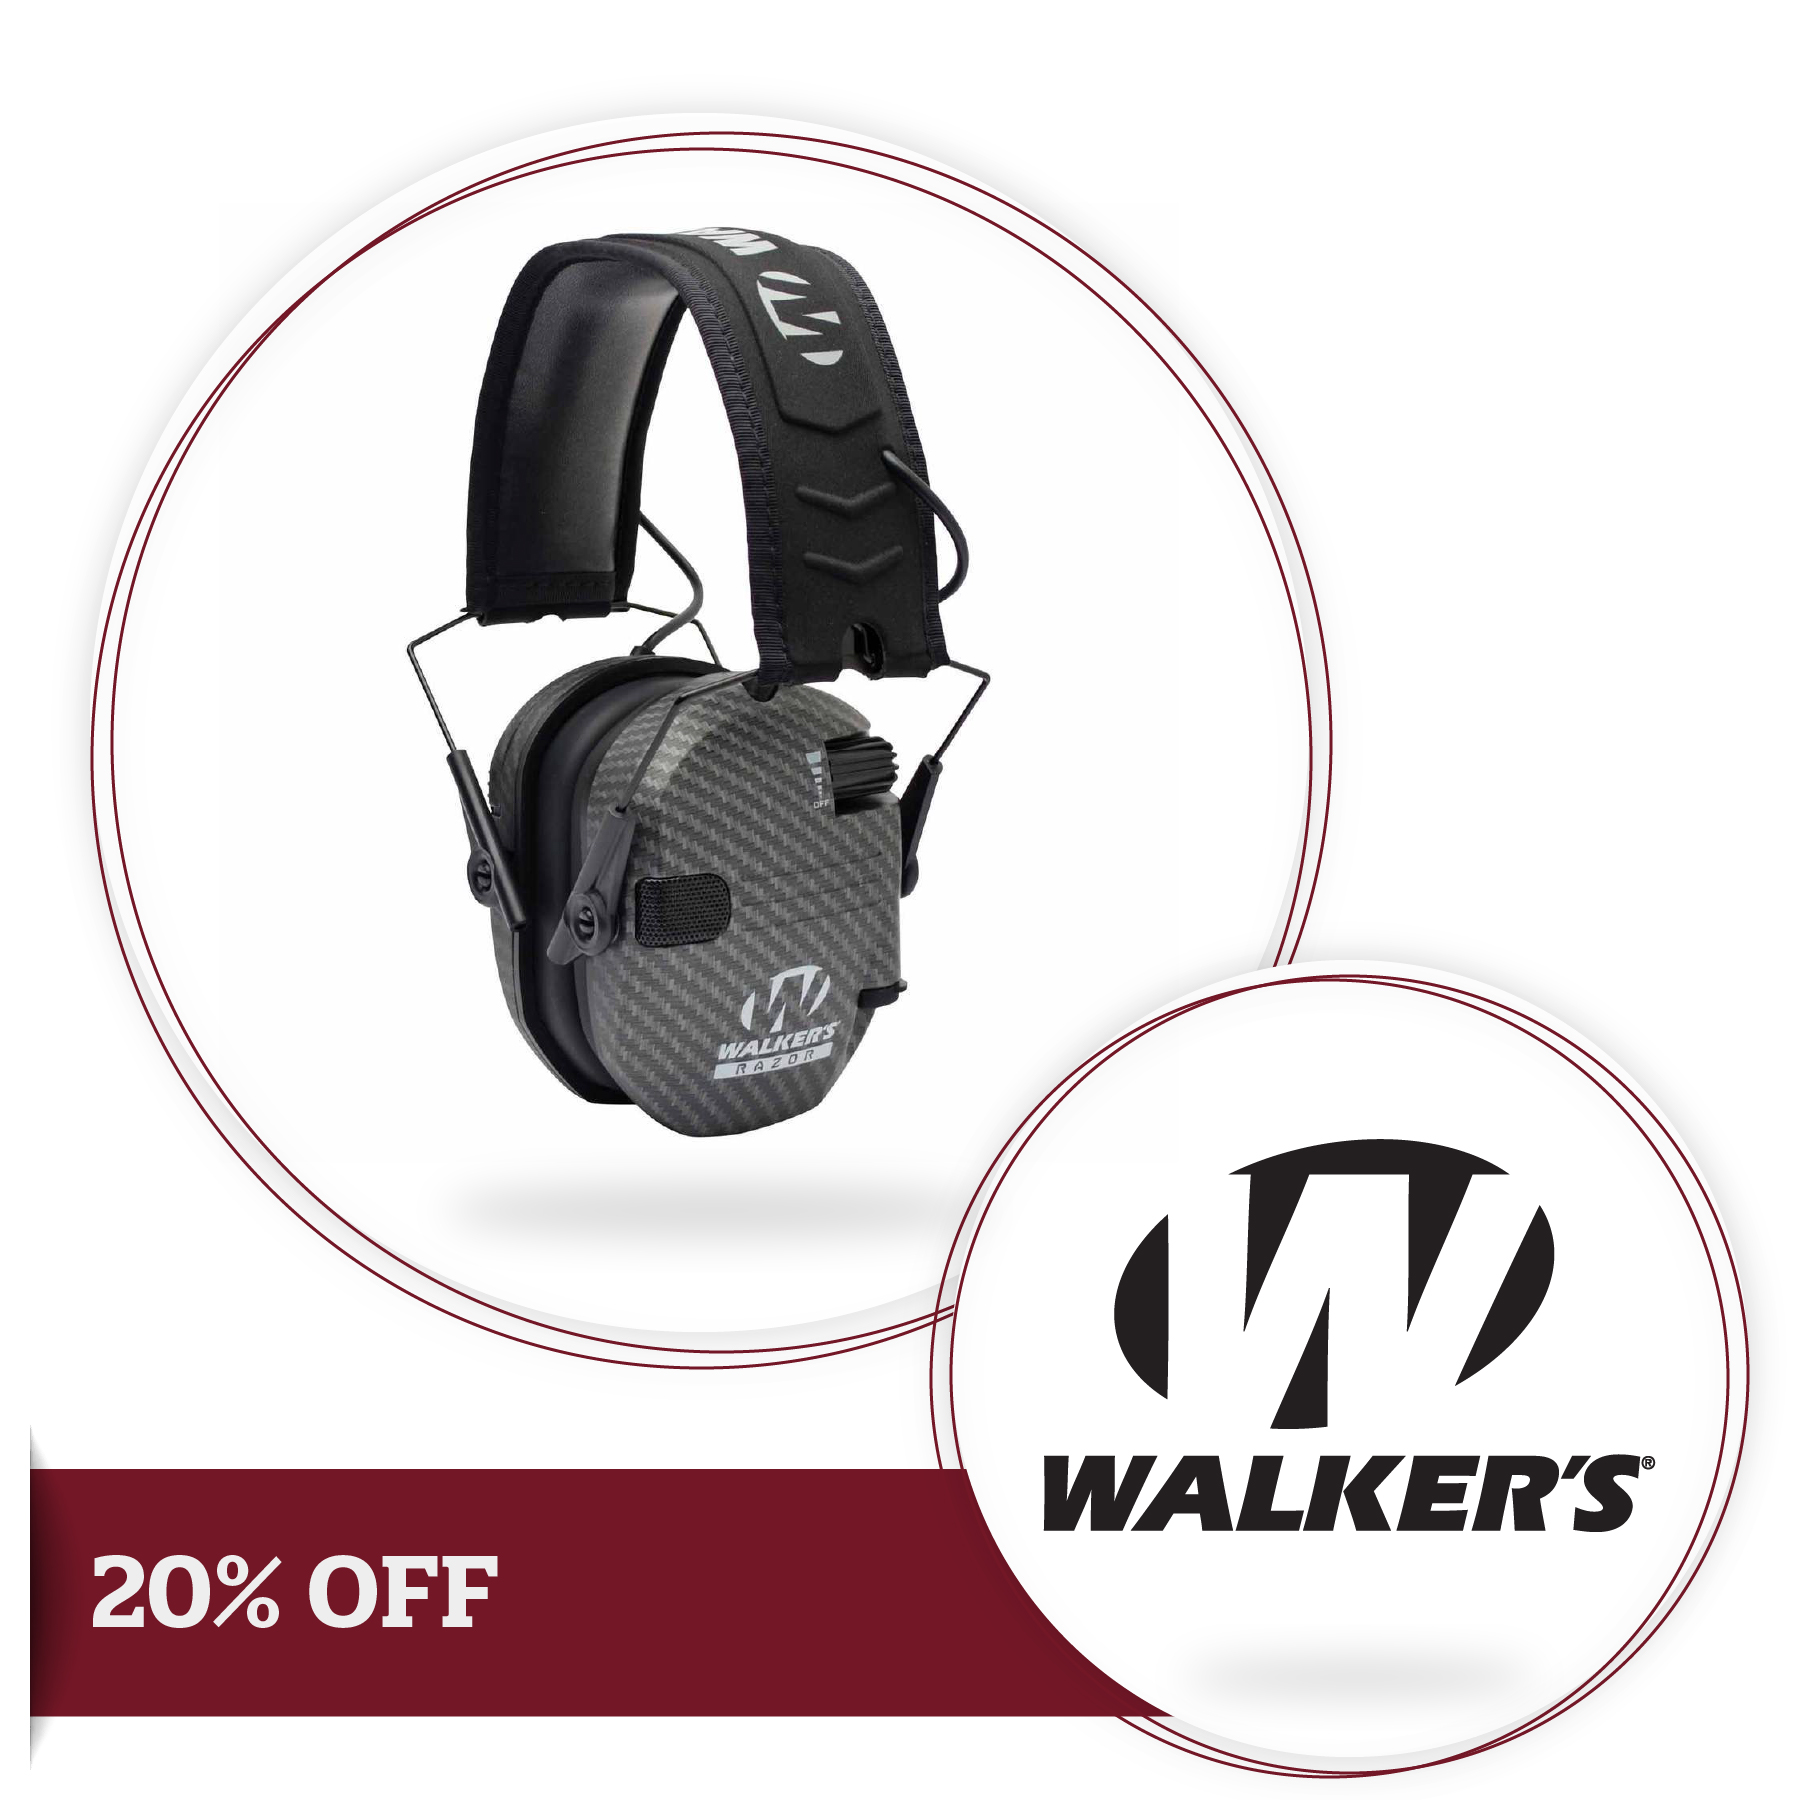 20% Off All Walker's Hearing & Eye Protection